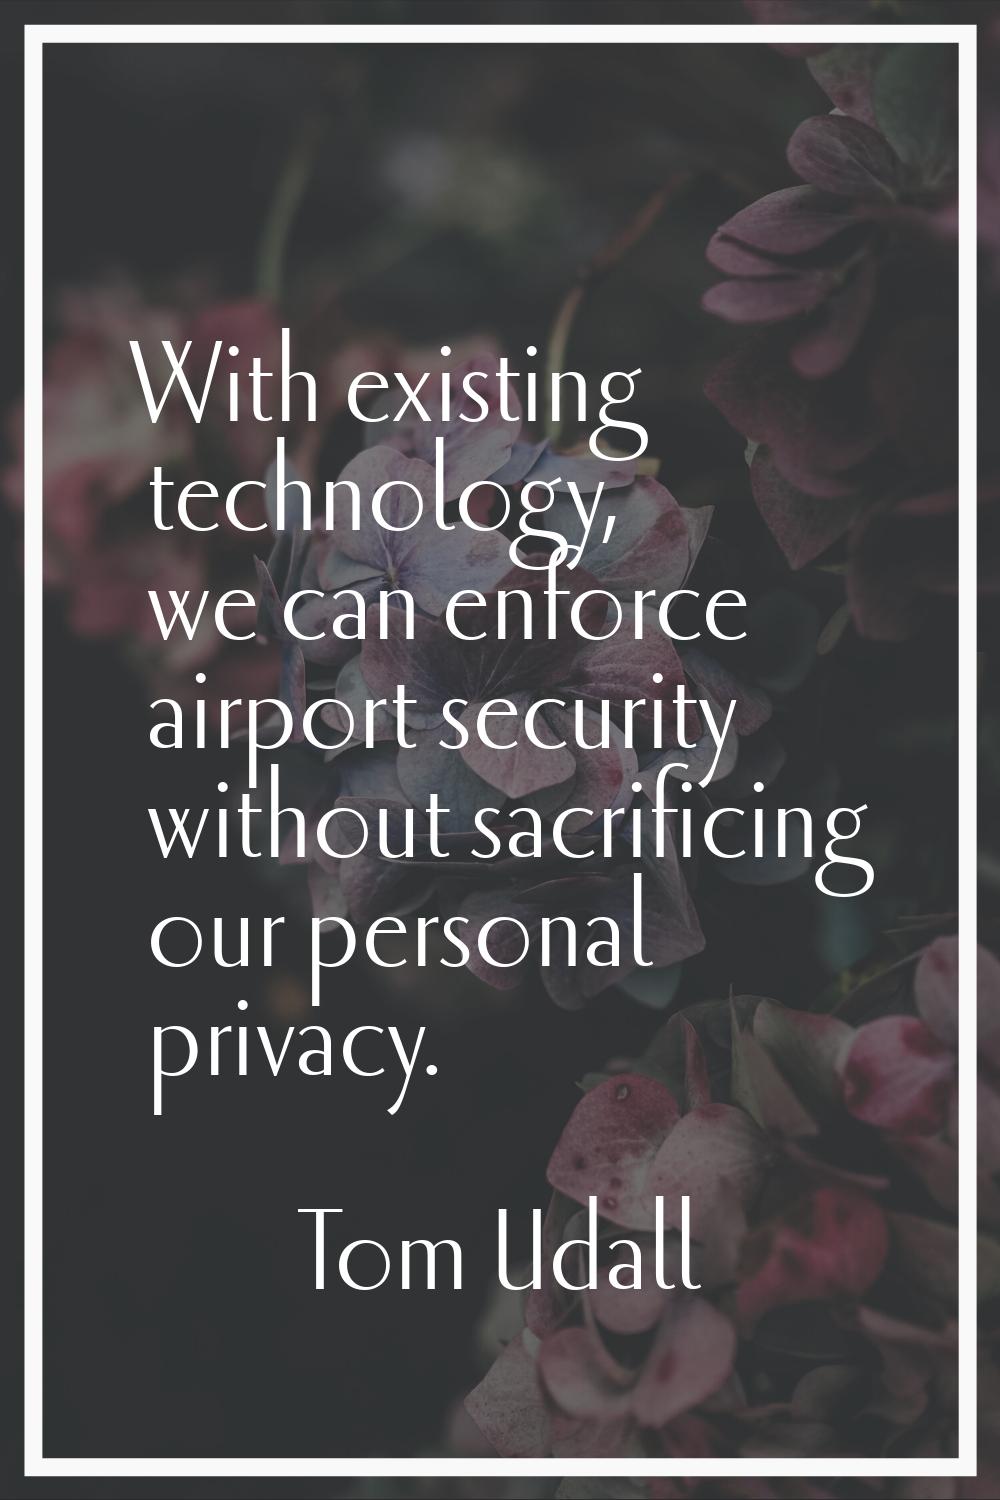 With existing technology, we can enforce airport security without sacrificing our personal privacy.